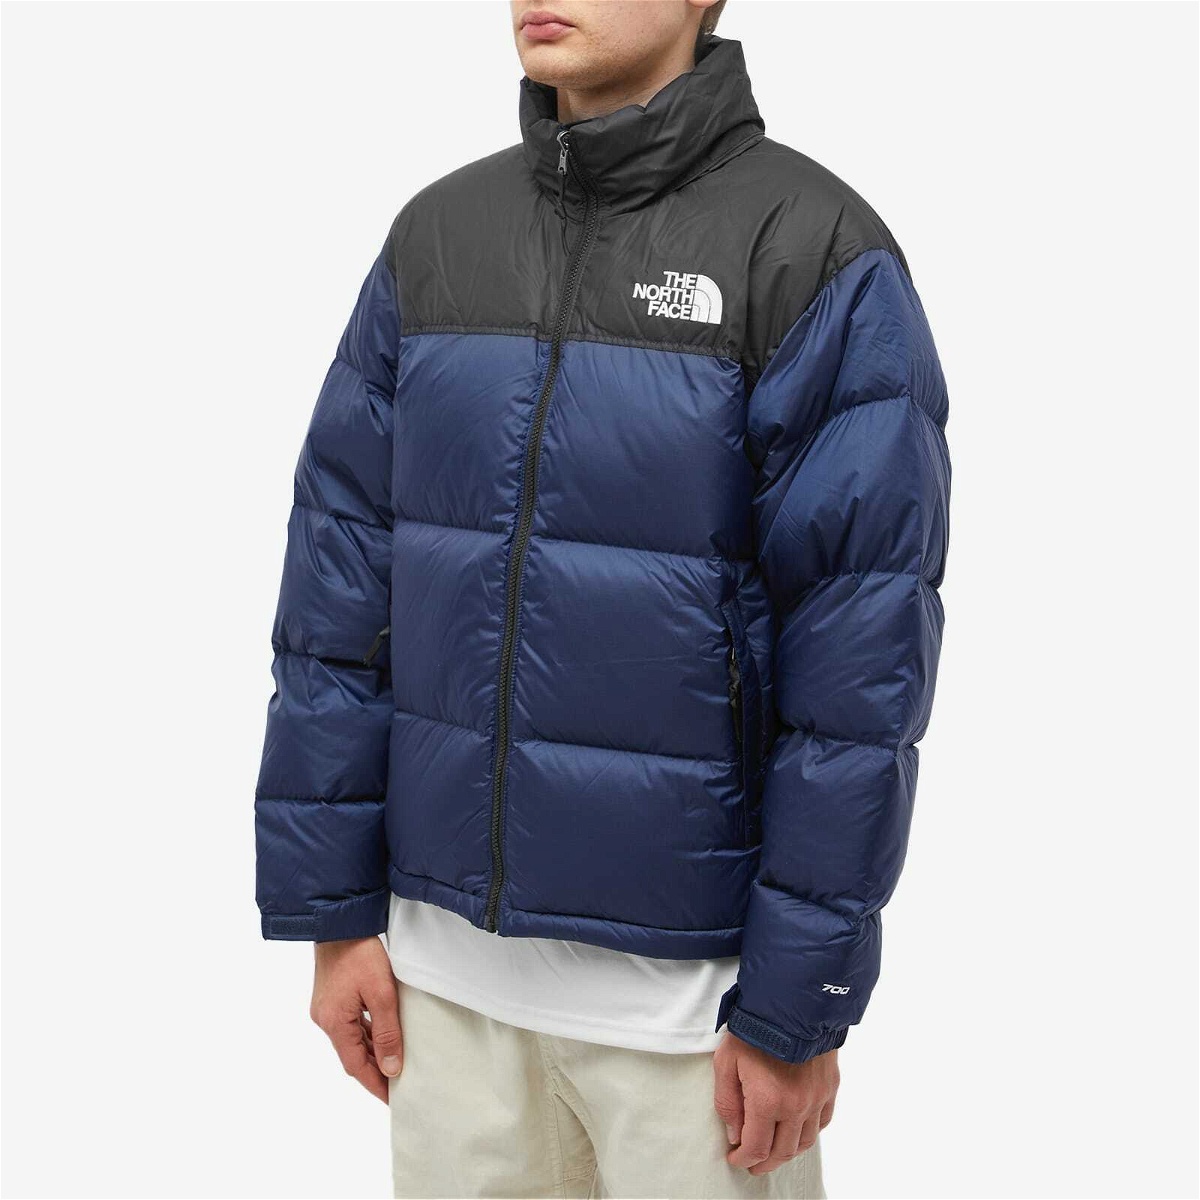 The North Face Men's Remastered Steep Tech Gore-Tex Work Jacket in